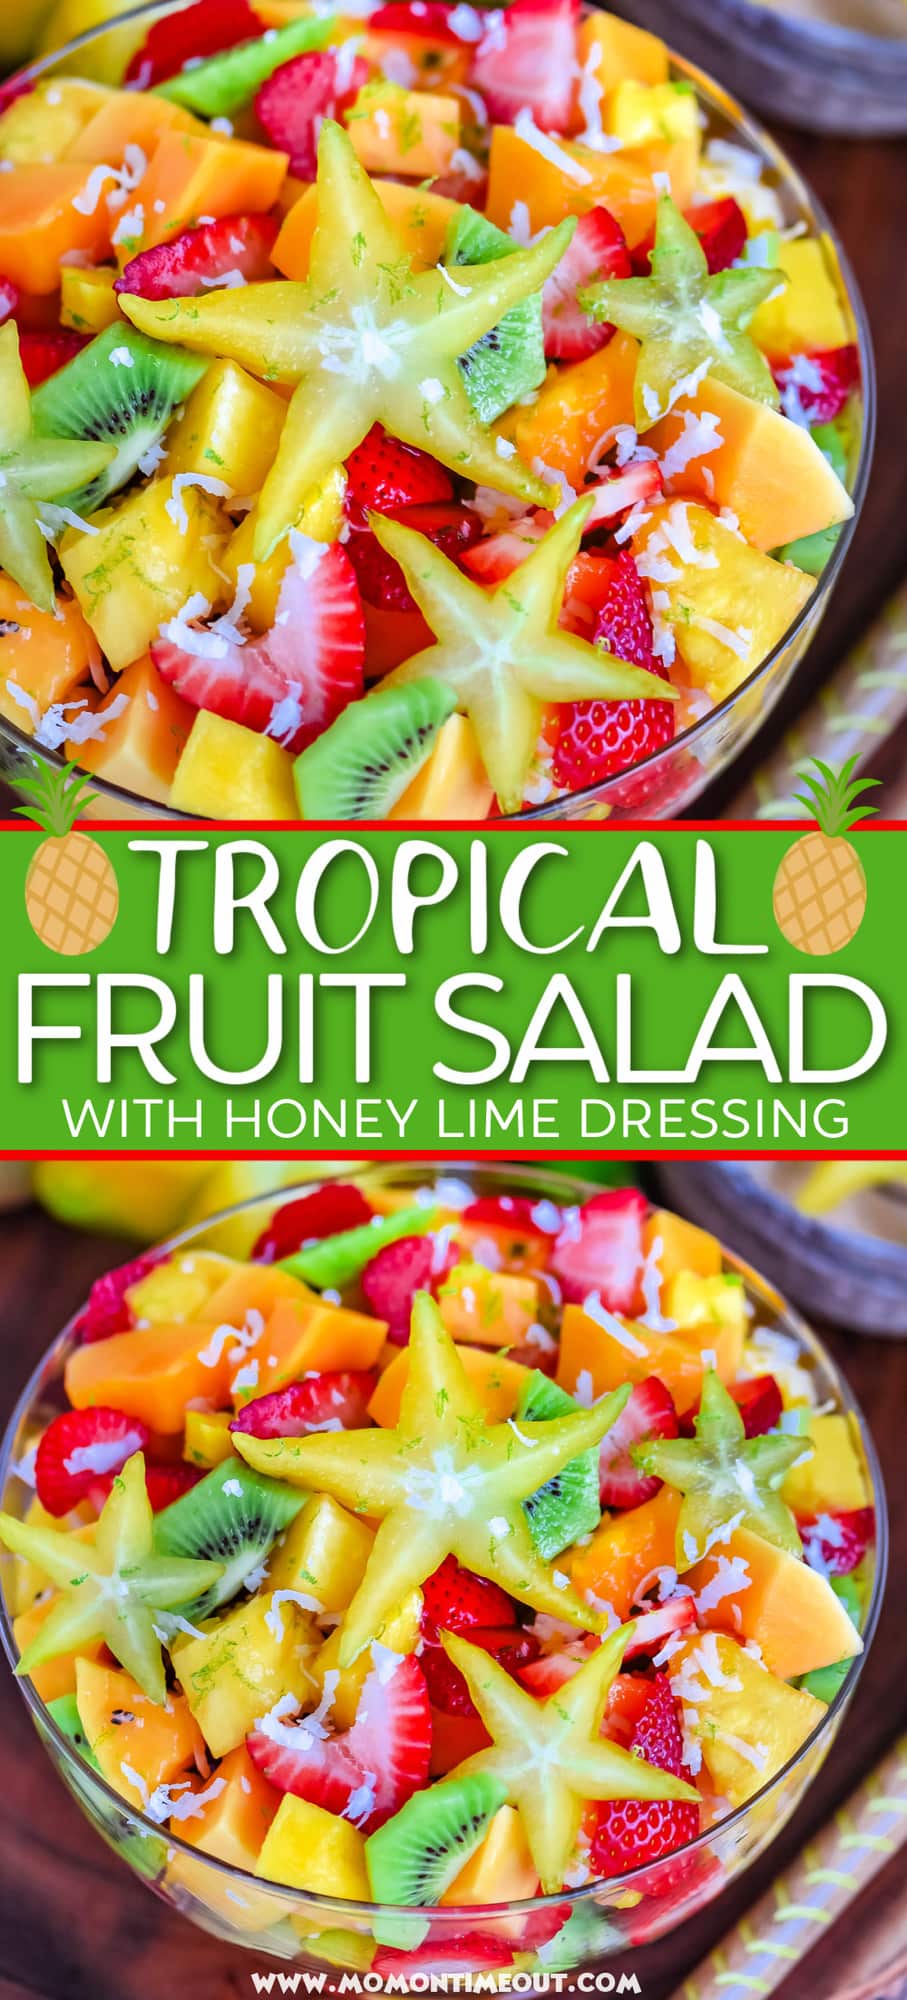 Tropical Fruit Salad with Honey Lime Dressing - Mom On Timeout